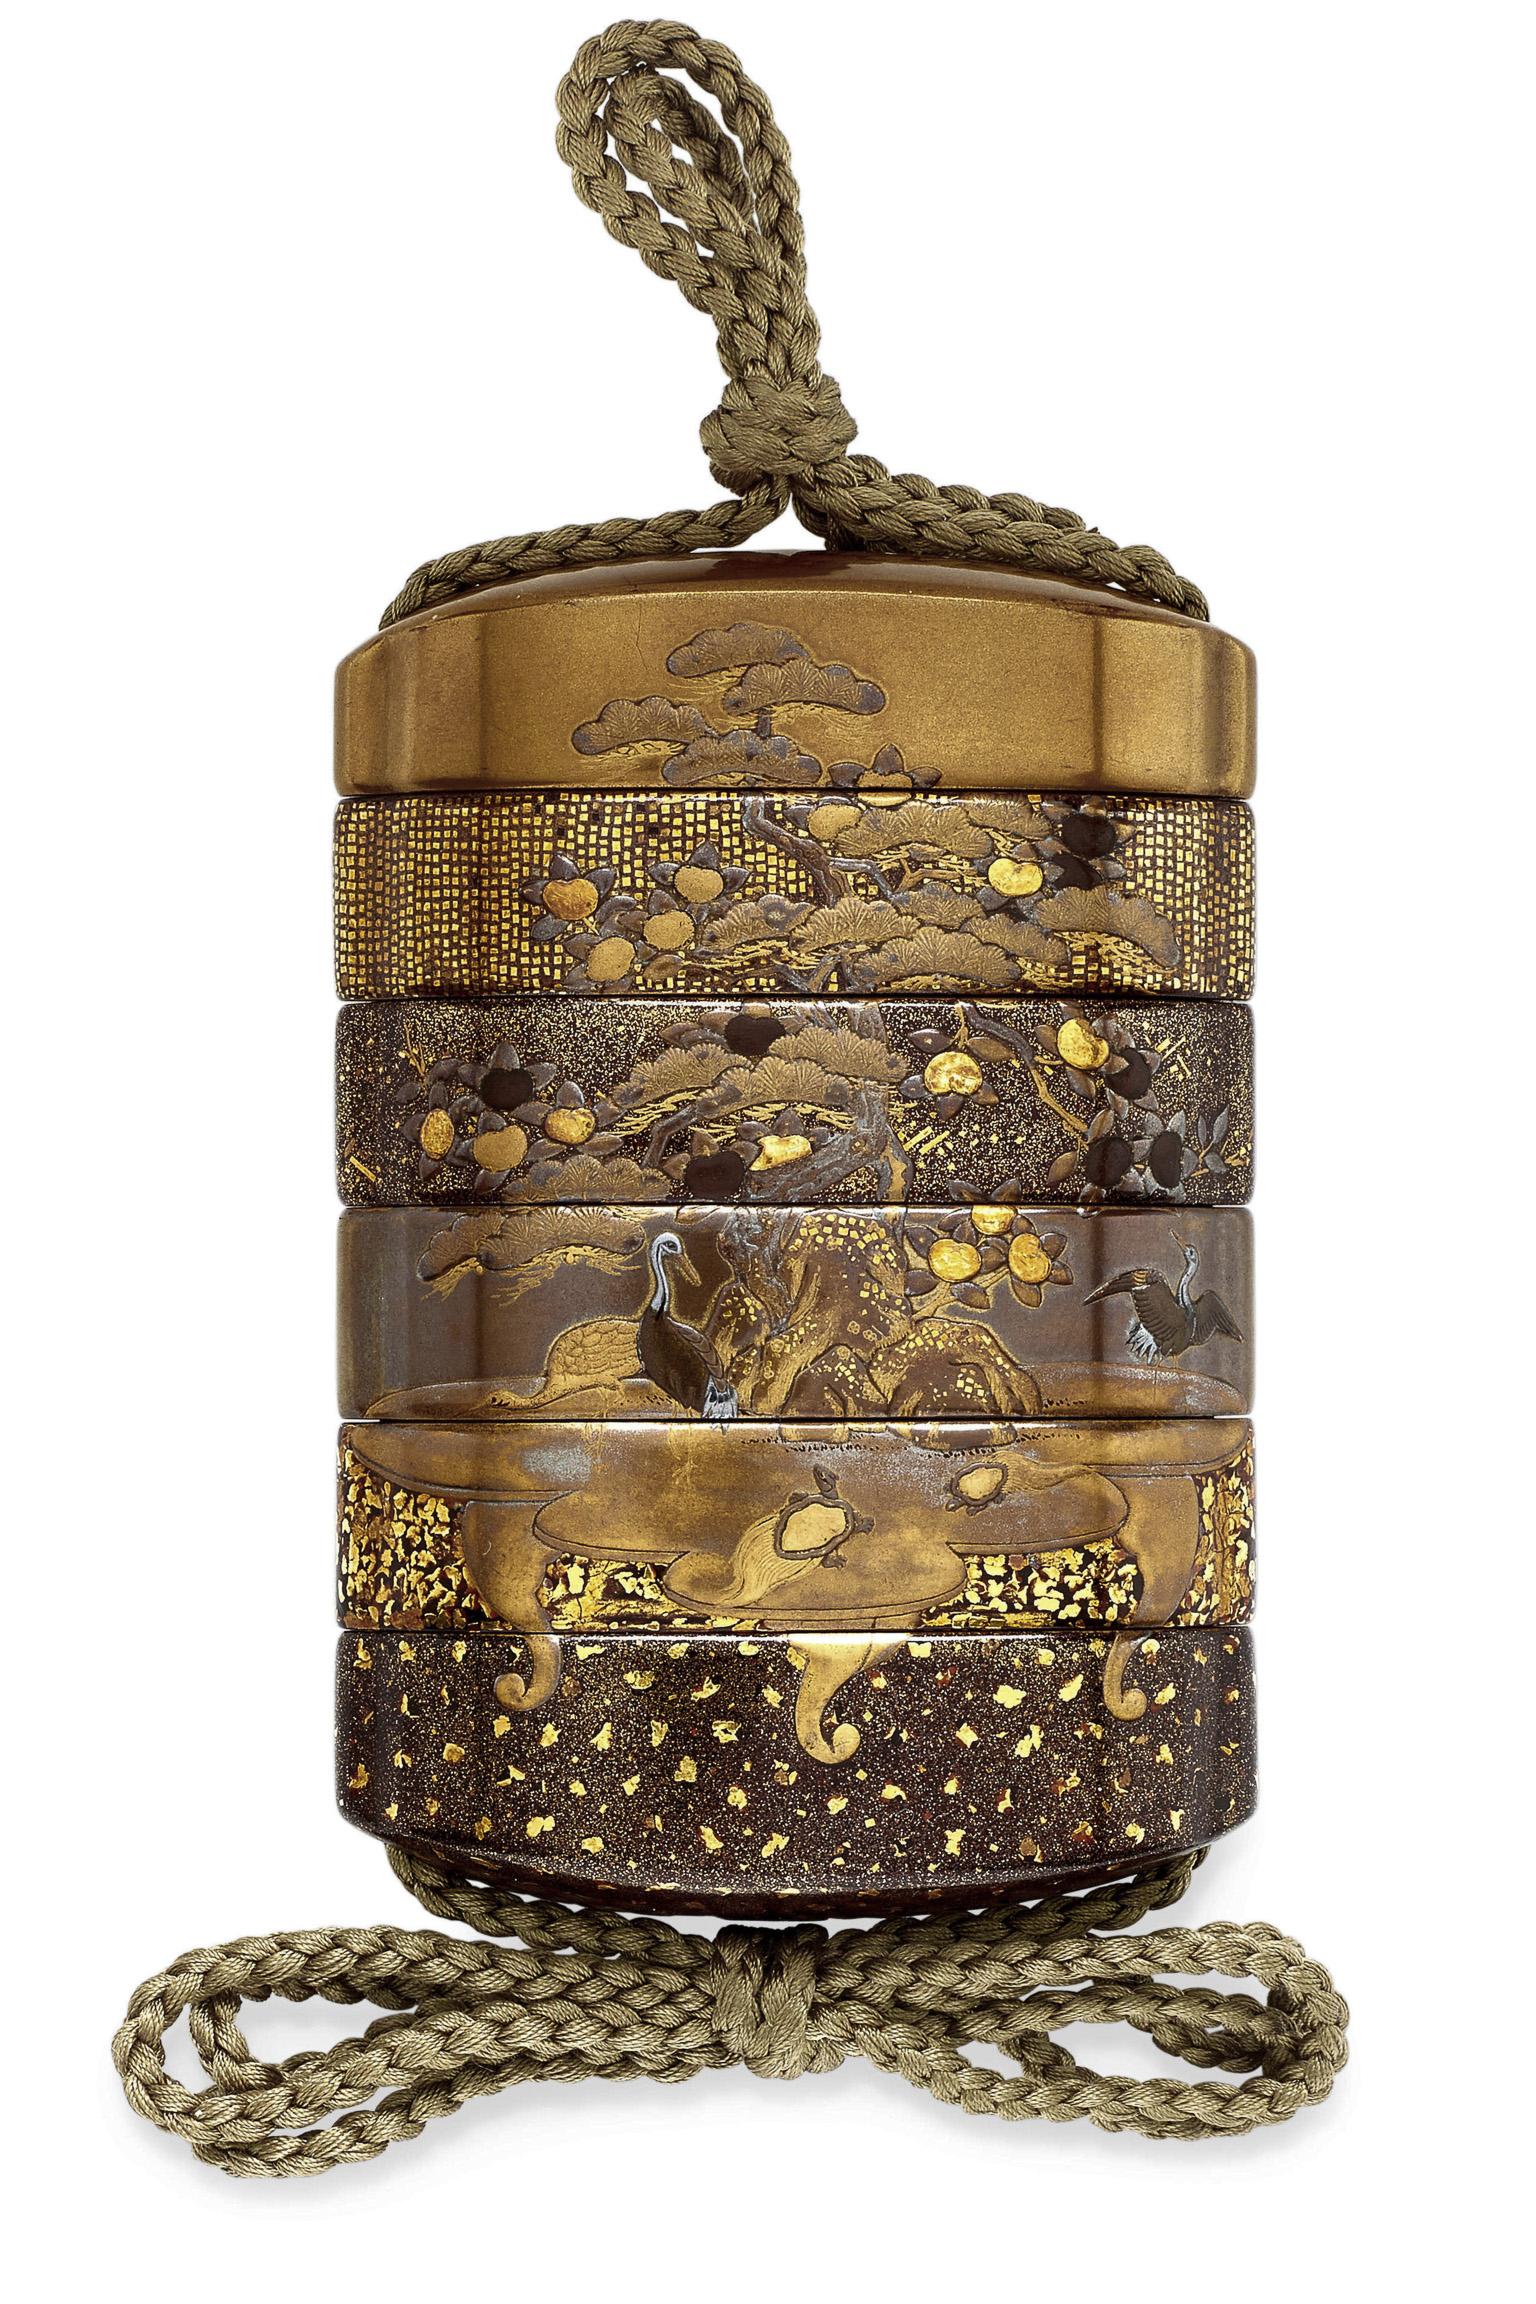 Signed: “Kajikawa saku” and with a red pot seal

Height: 3 1/8in (7.9cm)

Provenance:

Michael Tomkinson Collection

Leonard Haber Collection

Literature:

Michael Tomkinson, A Japanese Collection, London: George Allen, 1898, no. 300

Each case with